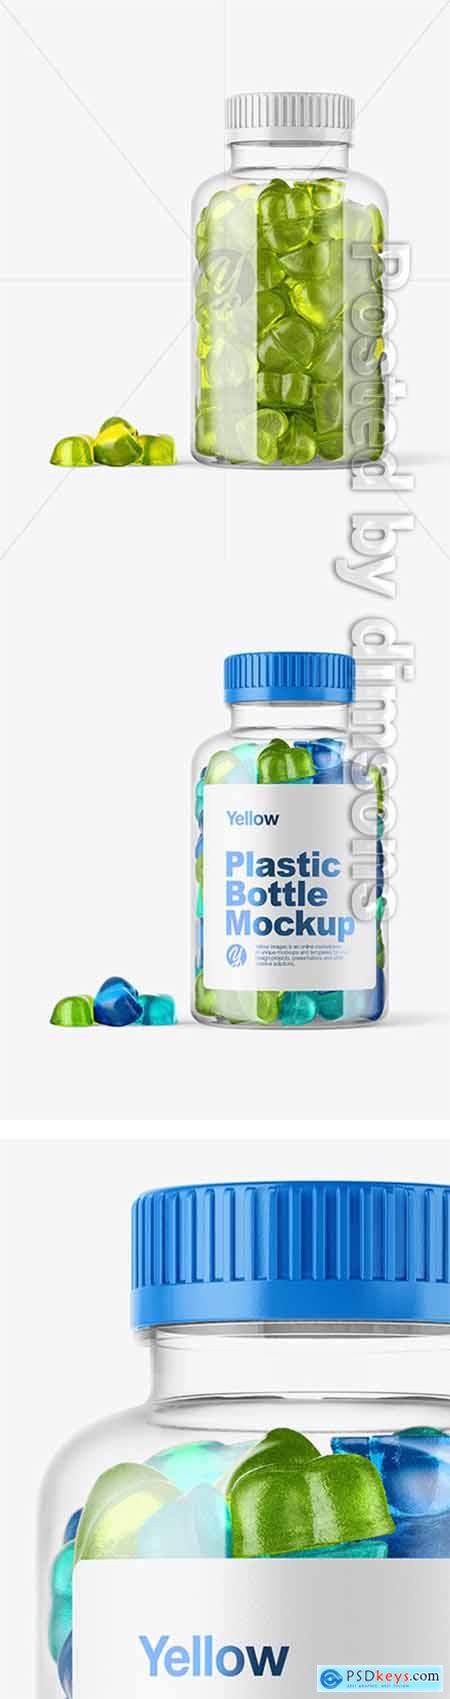 Download Plastic Bottle with Gummies Mockup 38698 » Free Download Photoshop Vector Stock image Via ...